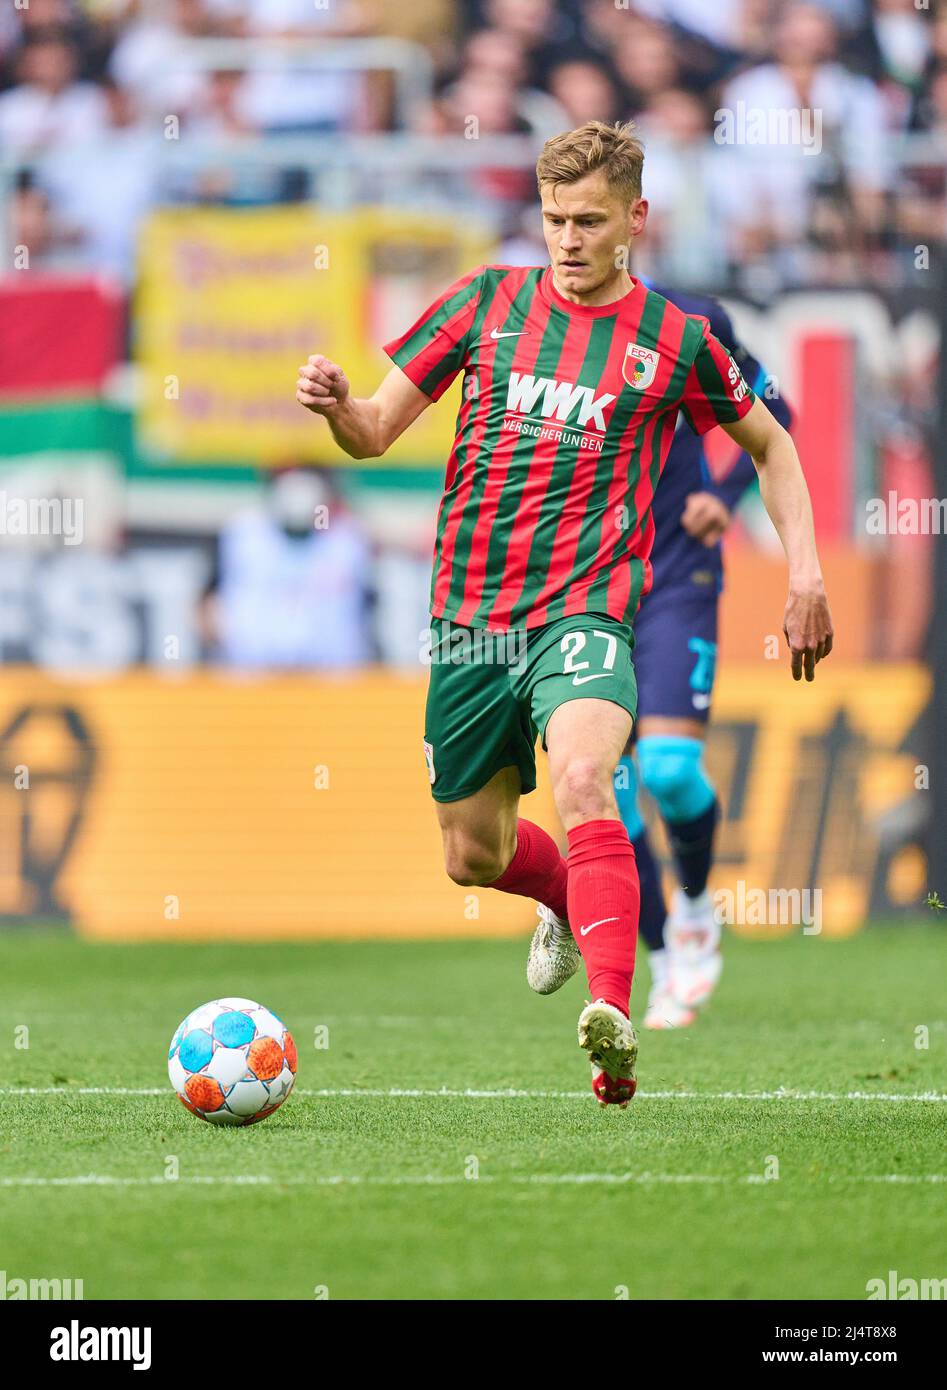 Alfred FINNBOGASON, FCA 27  in the match FC AUGSBURG - HERTHA BSC BERLIN 0-1 1.German Football League on April 16, 2022 in Augsburg, Germany  Season 2021/2022, matchday 30, 1.Bundesliga, 30.Spieltag. © Peter Schatz / Alamy Live News    - DFL REGULATIONS PROHIBIT ANY USE OF PHOTOGRAPHS as IMAGE SEQUENCES and/or QUASI-VIDEO - Stock Photo